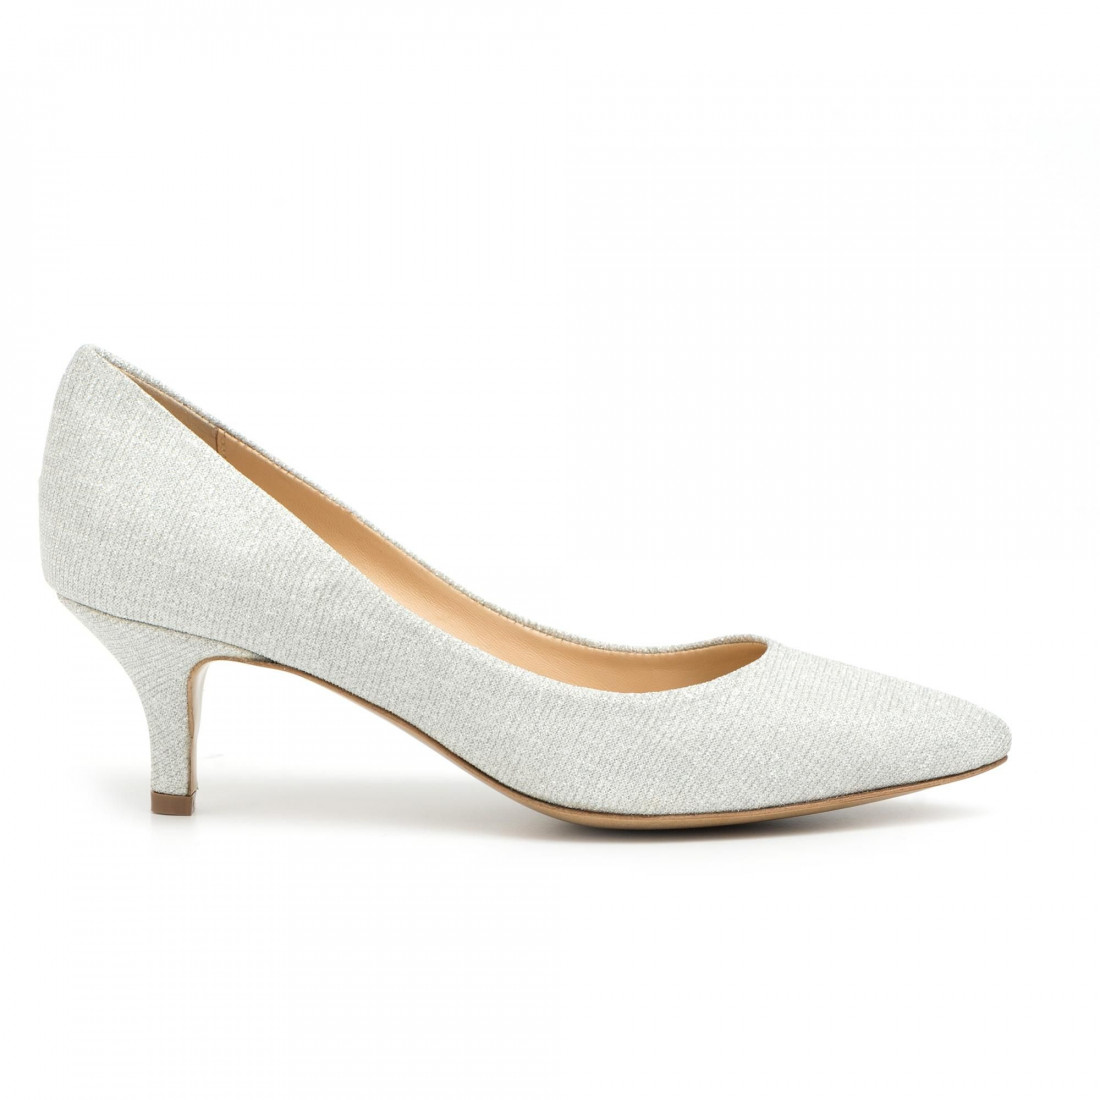 Medium heel pointed toe shoes in pearl fabric